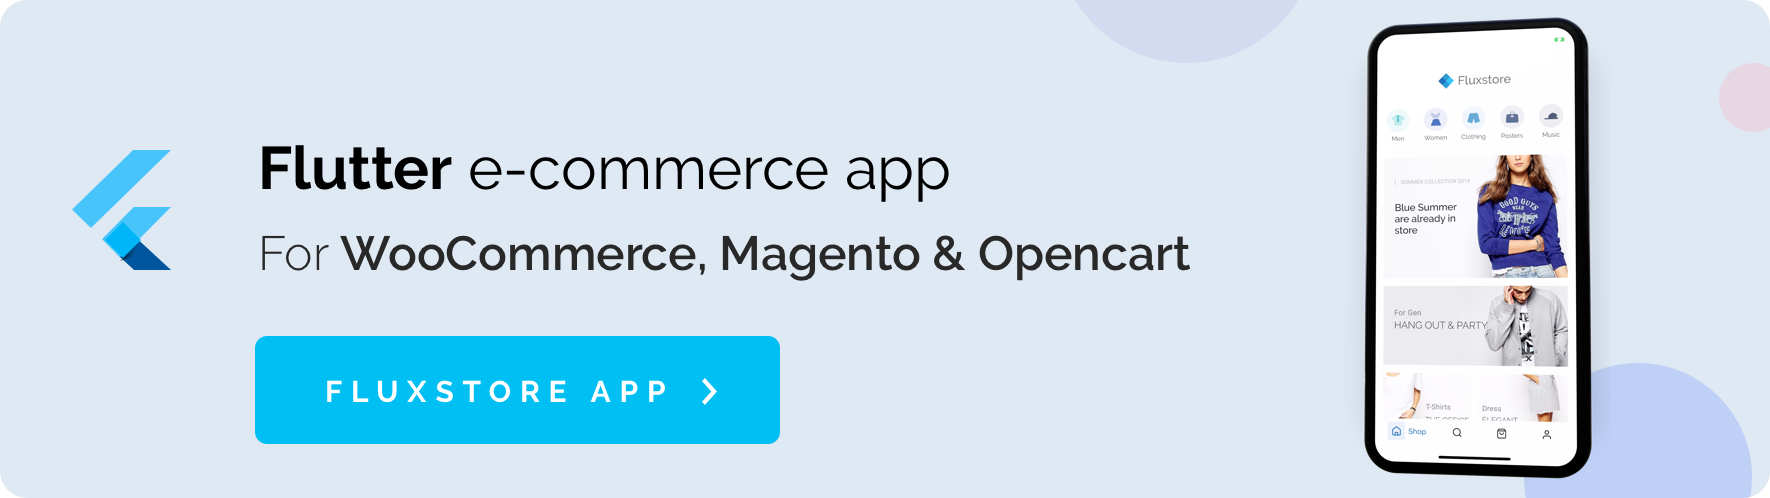 MStore Opencart - the complete react native e-commerce app (Expo version) - 10